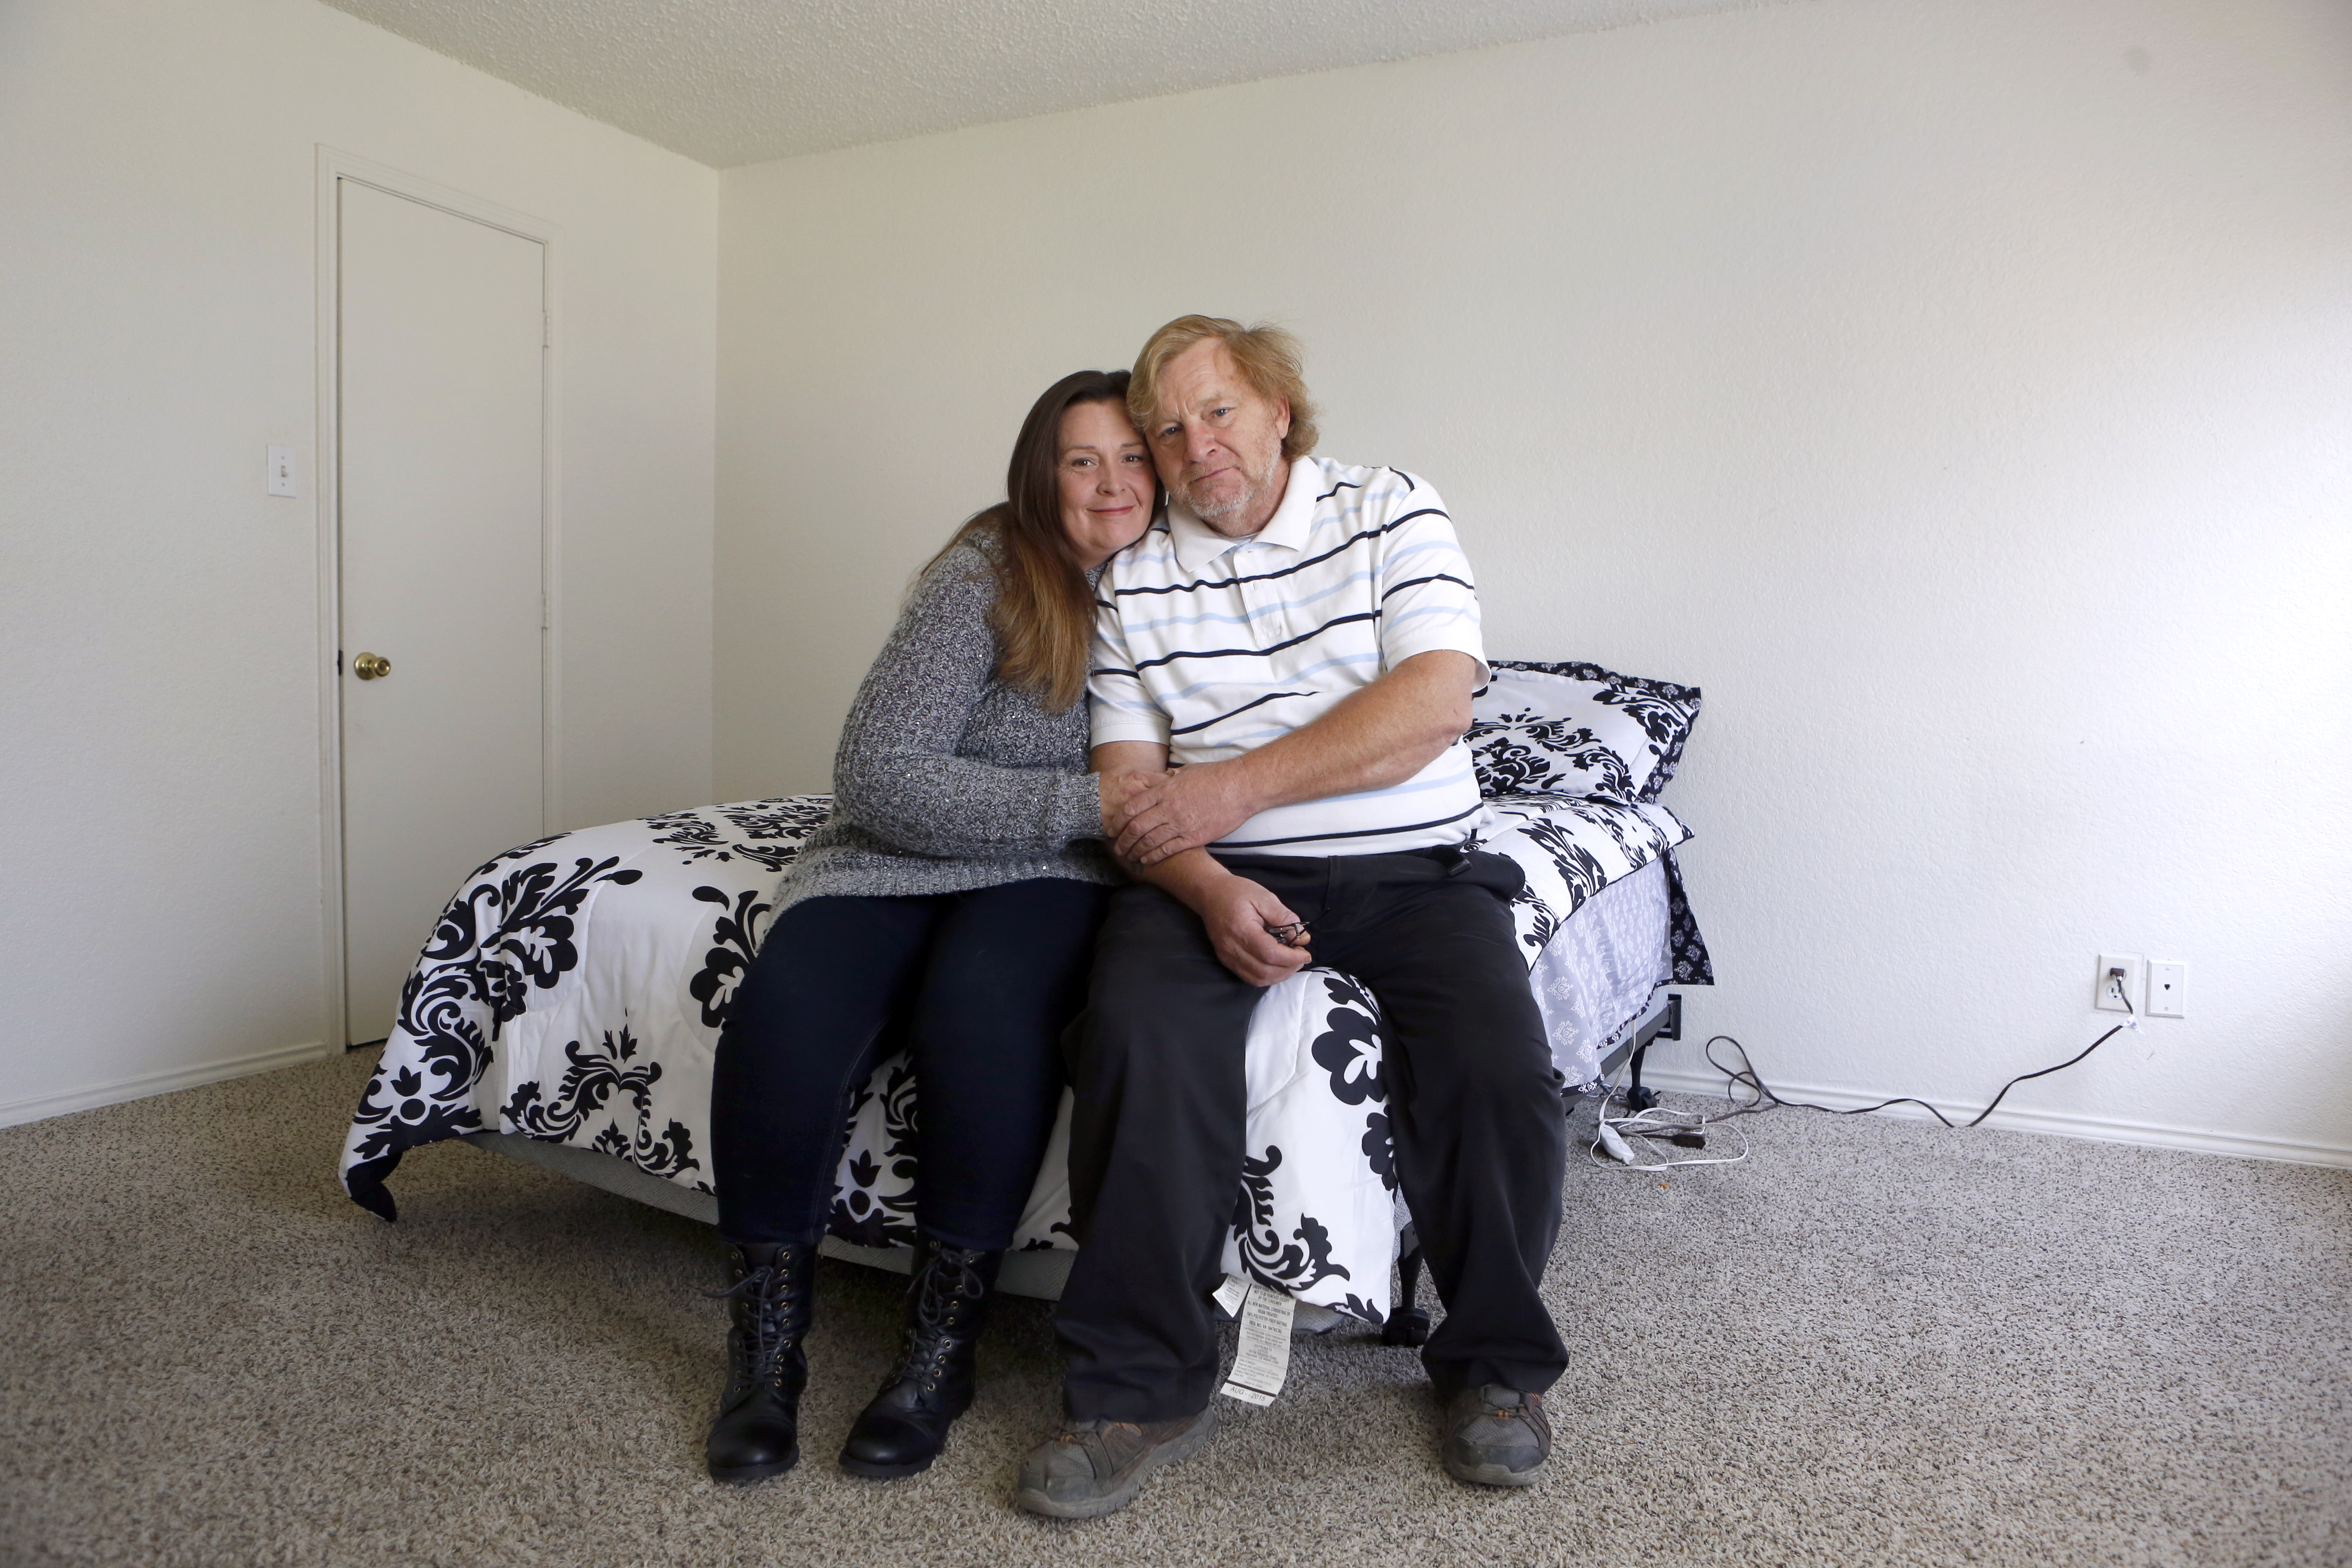 After three years staying in motels, the Rosenheim family just moved into a three-bedroom home where each child has their own bed. Parents Belinda and Dave in the bedroom they share. (photo copyright Lara Solt)